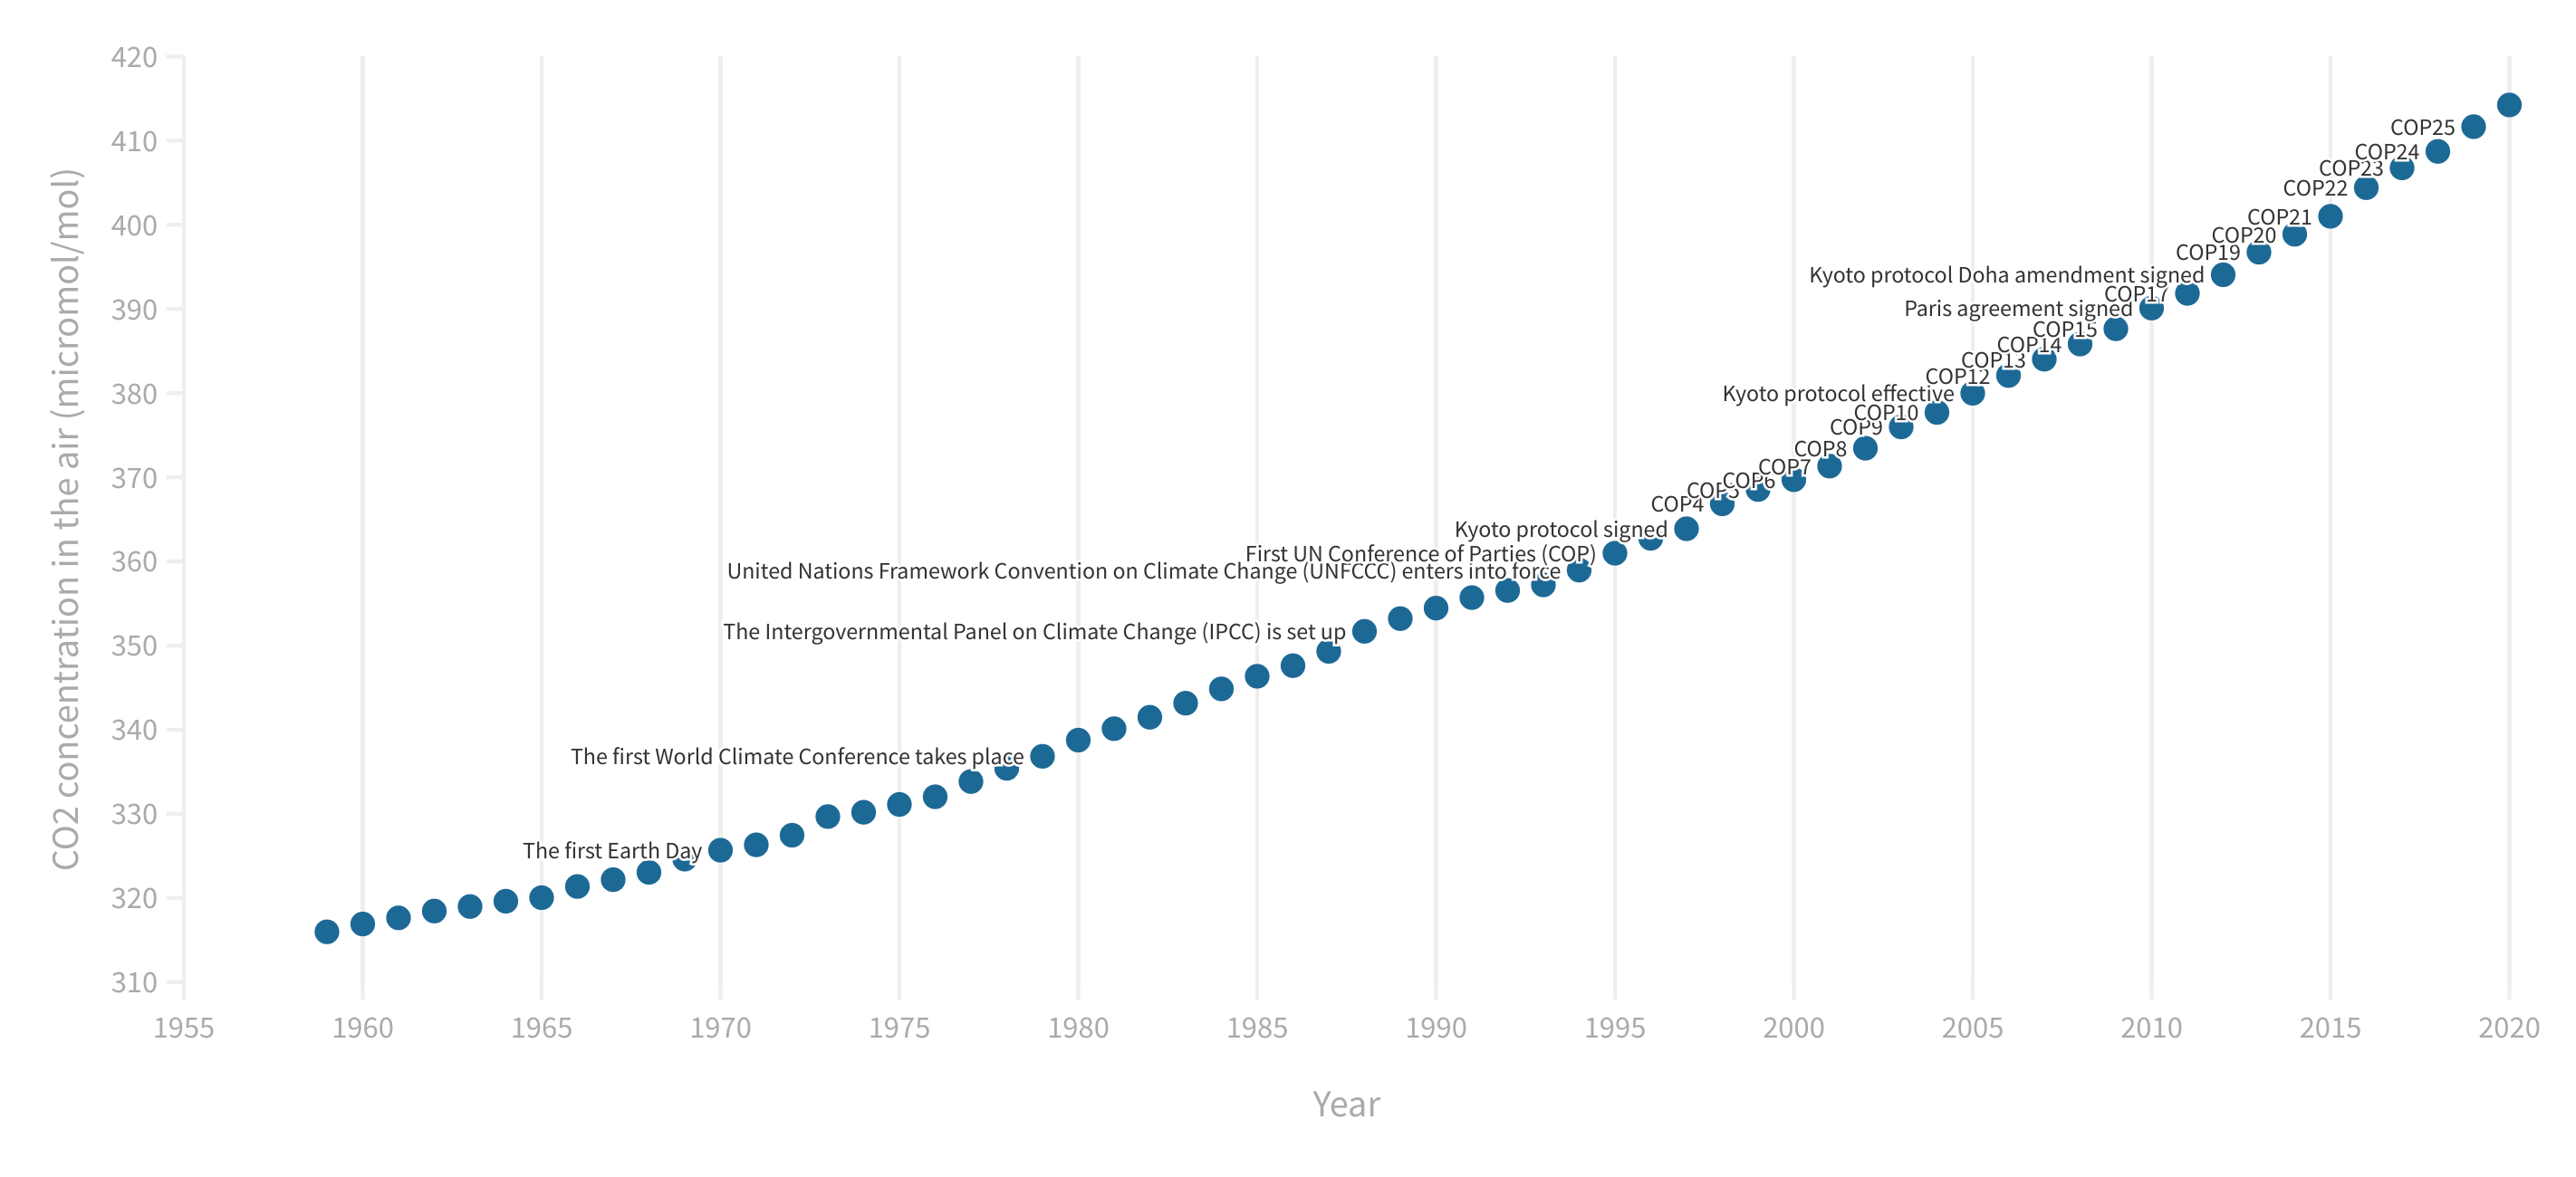 Scatter plot of CO2 annual air concentration juxtaposed on date of main climate change related conference showing an continual increase in CO2 air concentration since the mid 1950s